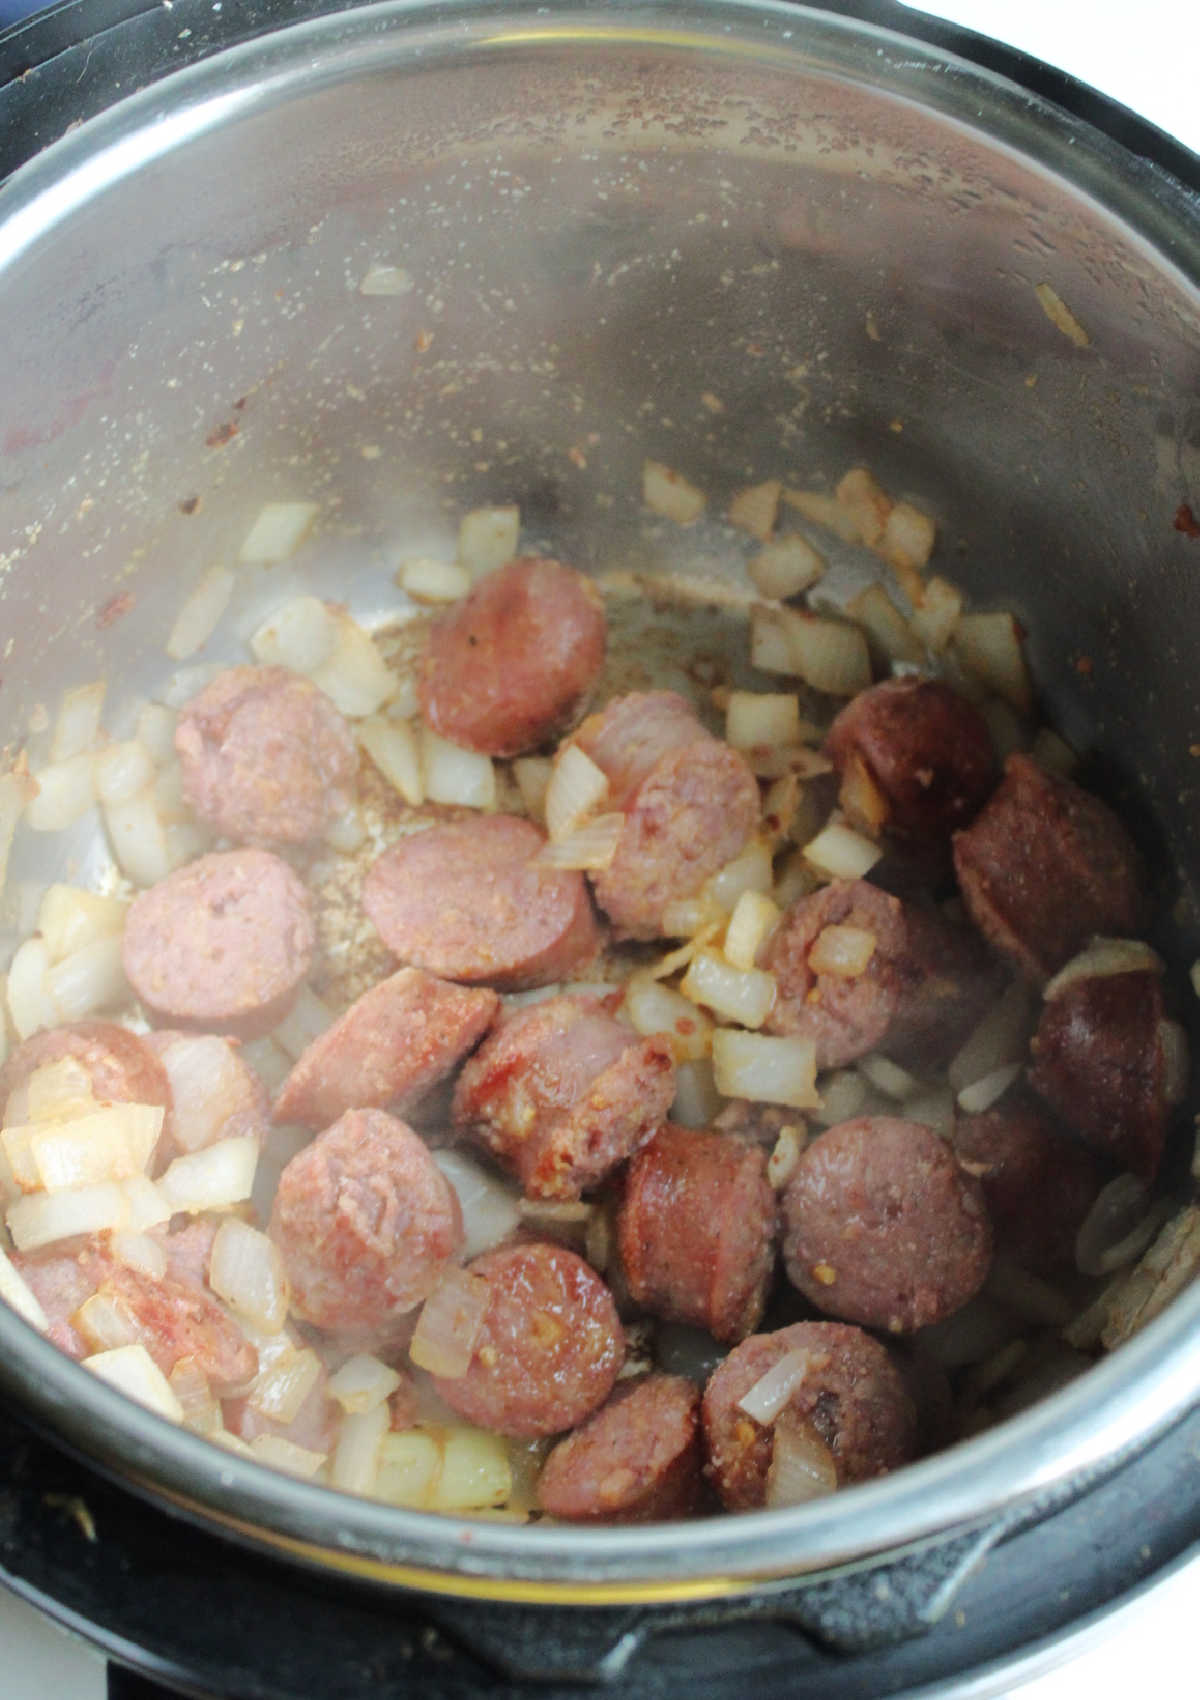 Looking inside instant pot showing browned pieces of kielbasa and softened onions.